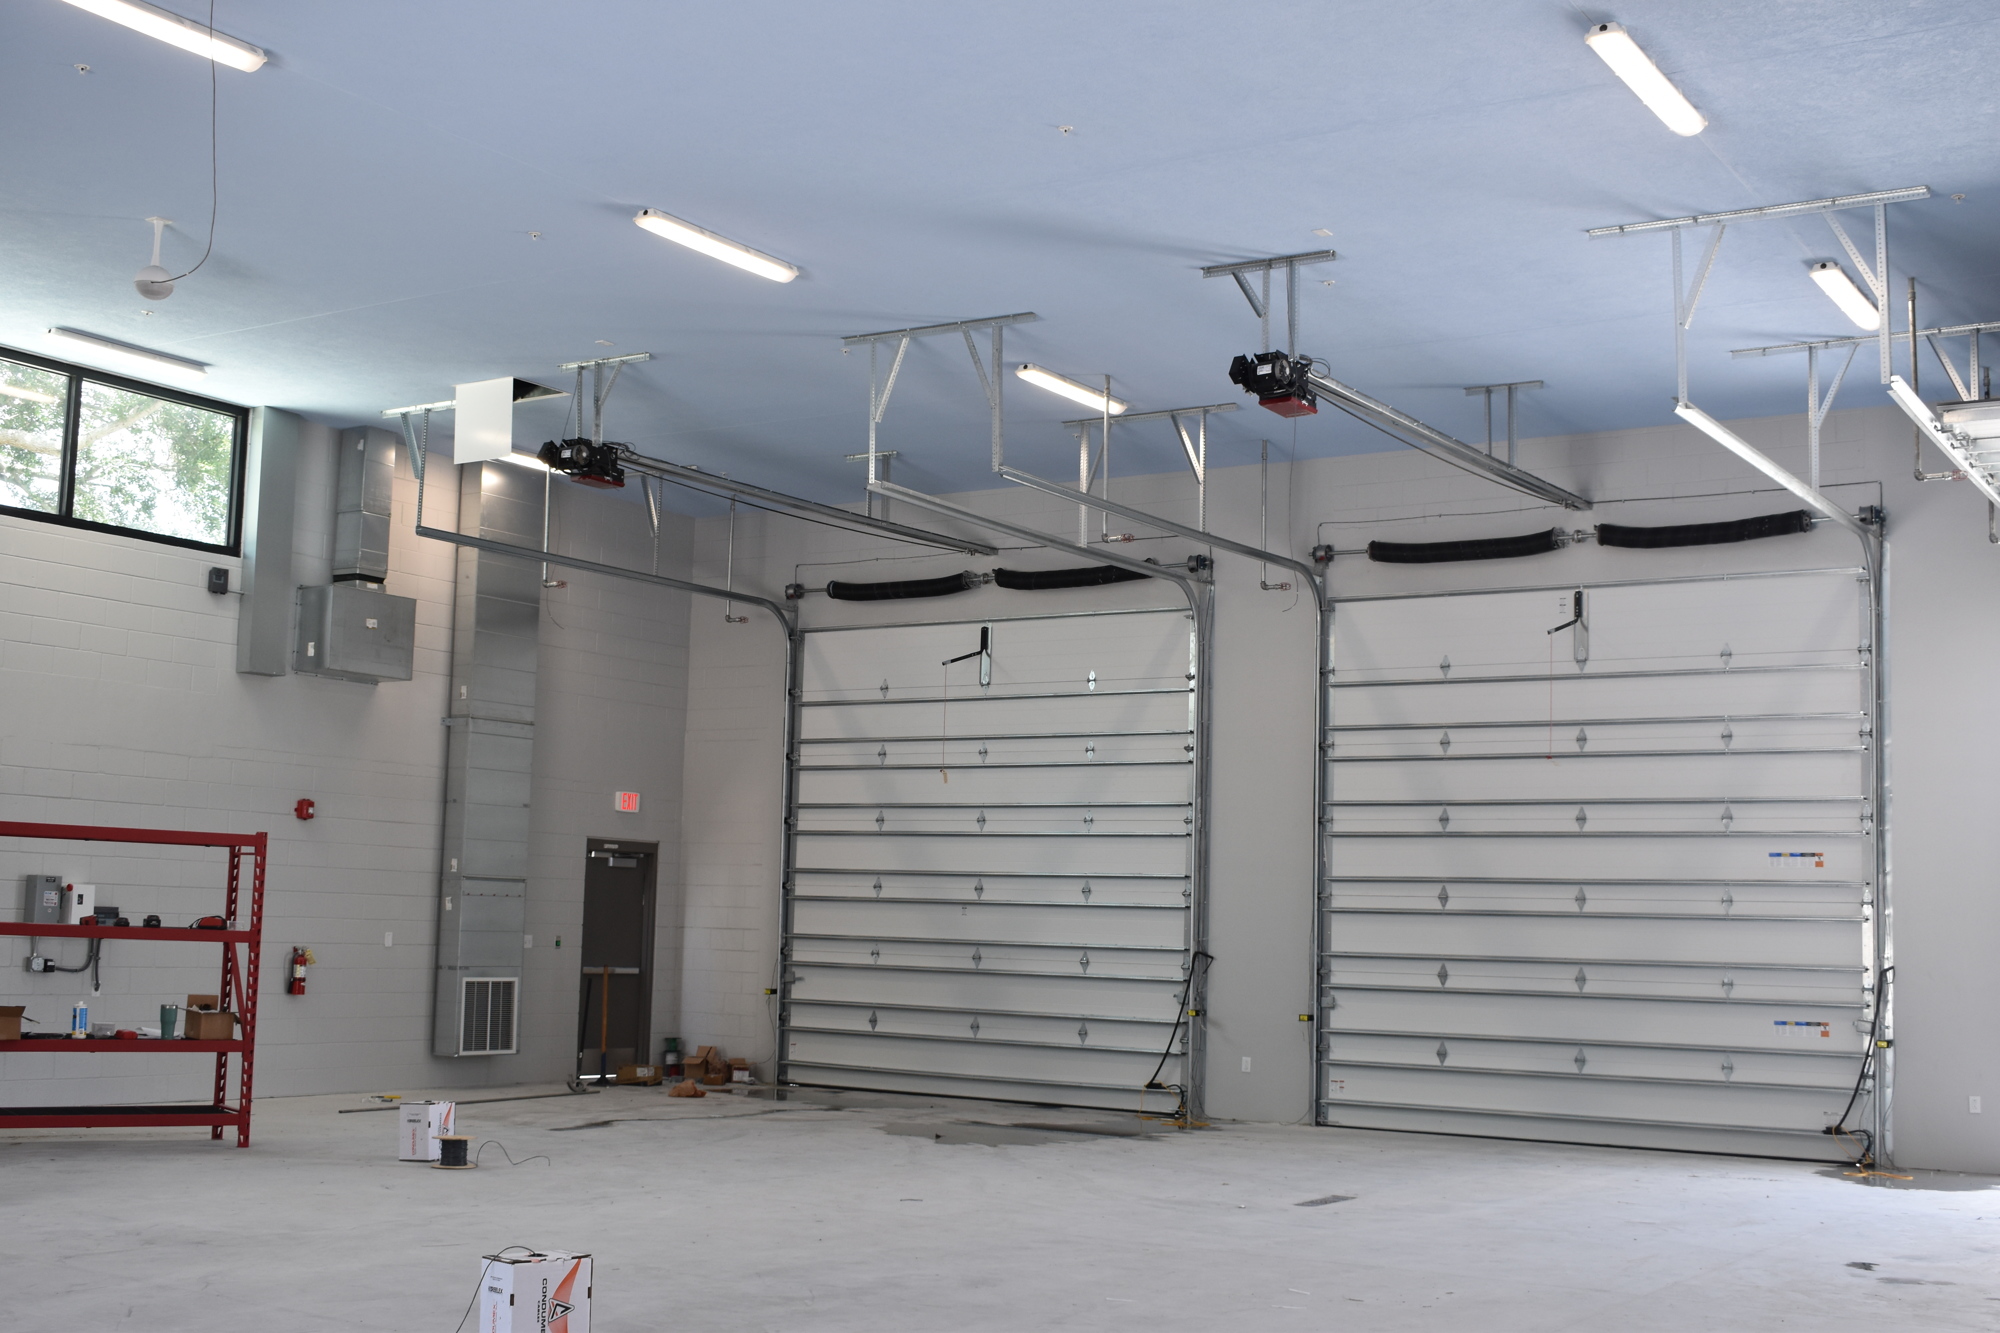 The town received its garage doors for Fire Station 92 in July.